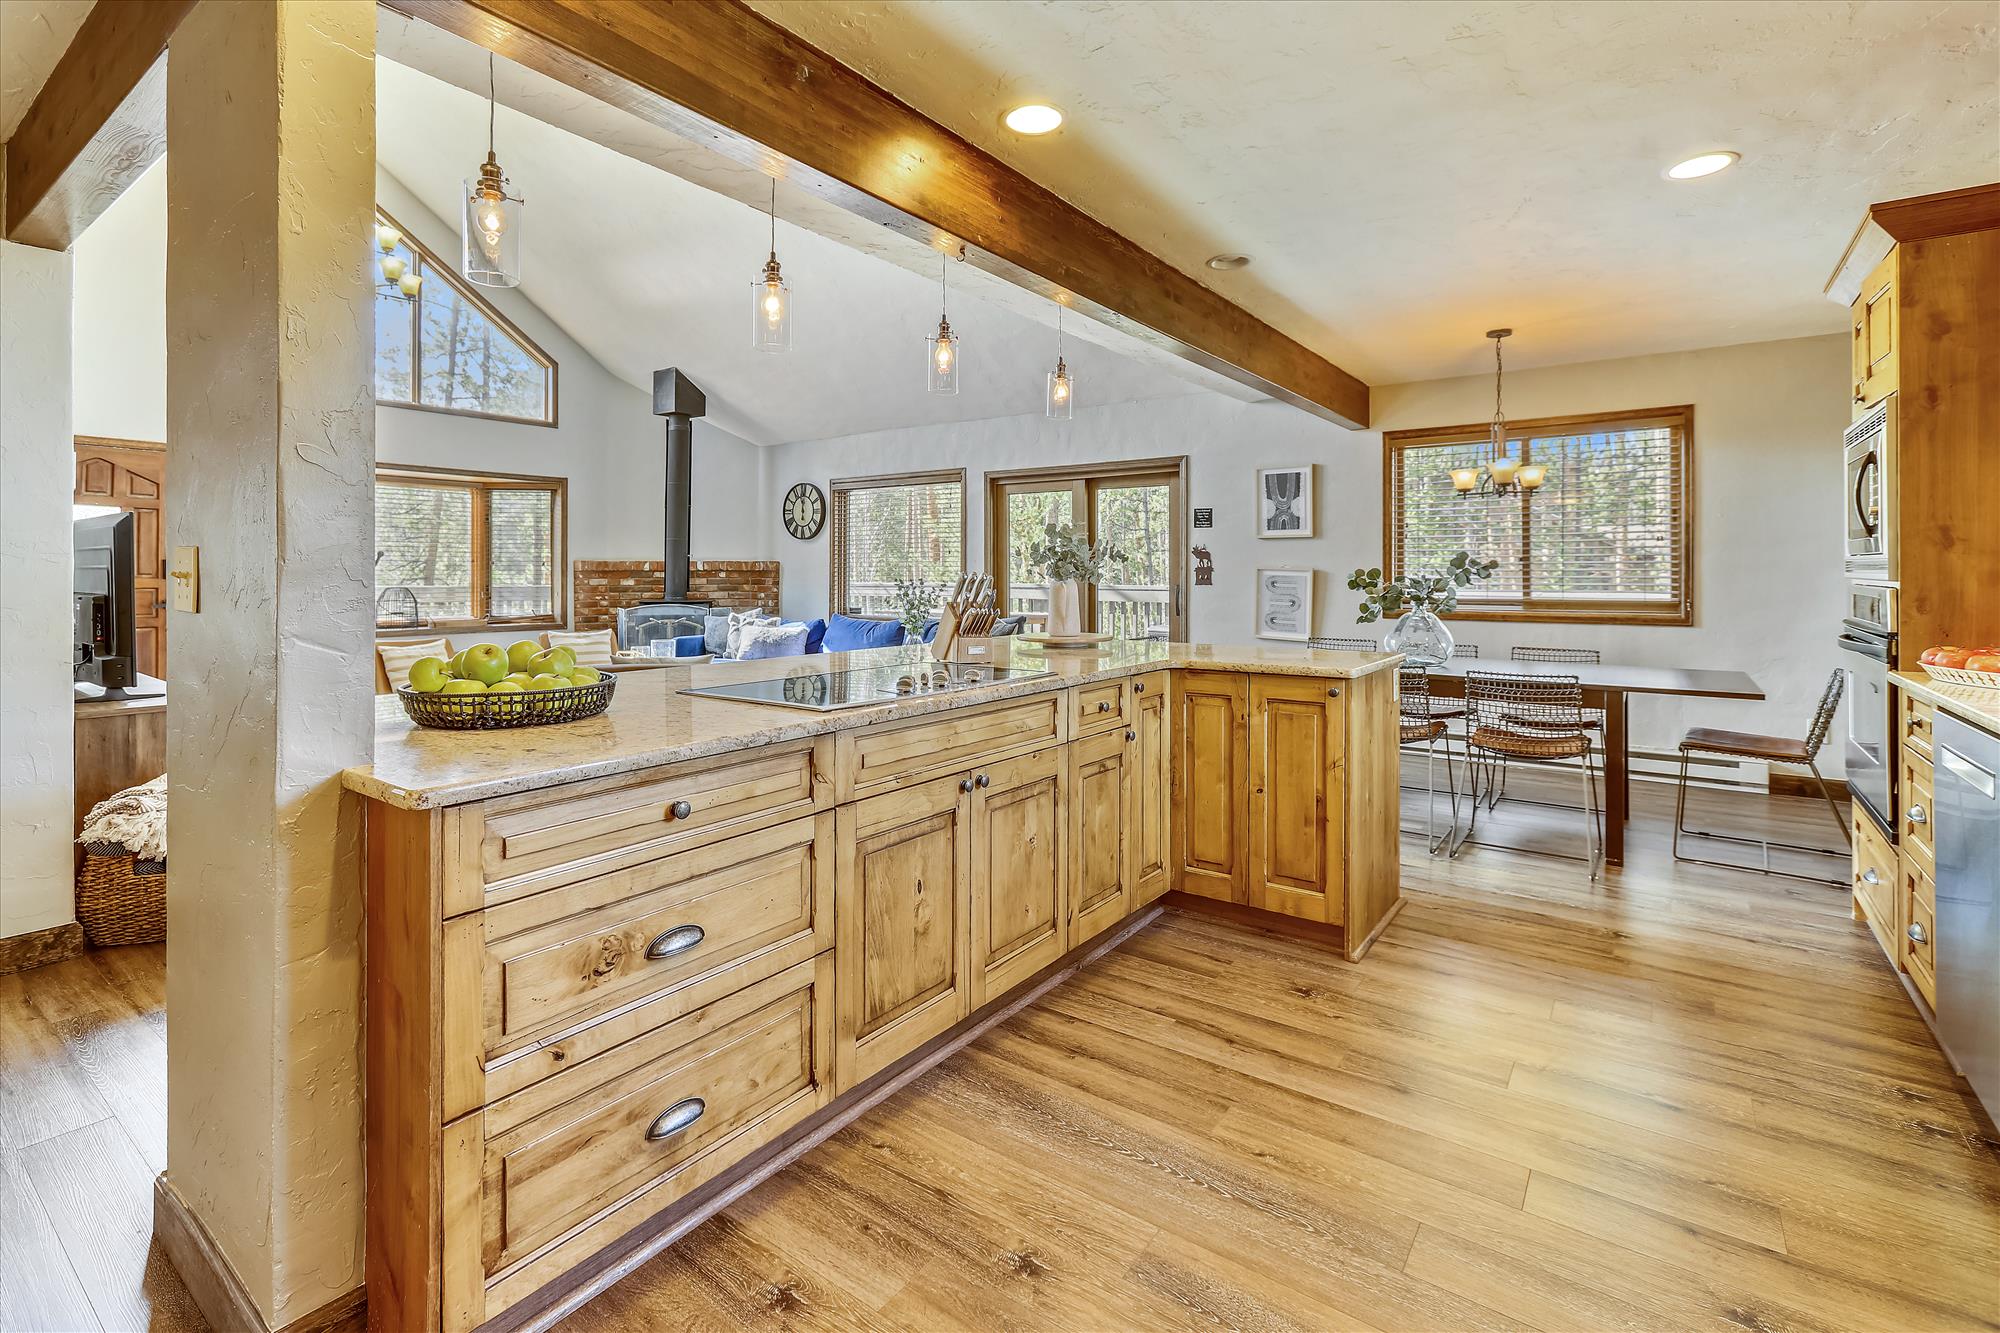 Stainless steel appliances and ample space for all of your cooking needs - Calderon De La Breck Breckenridge Vacation Rental